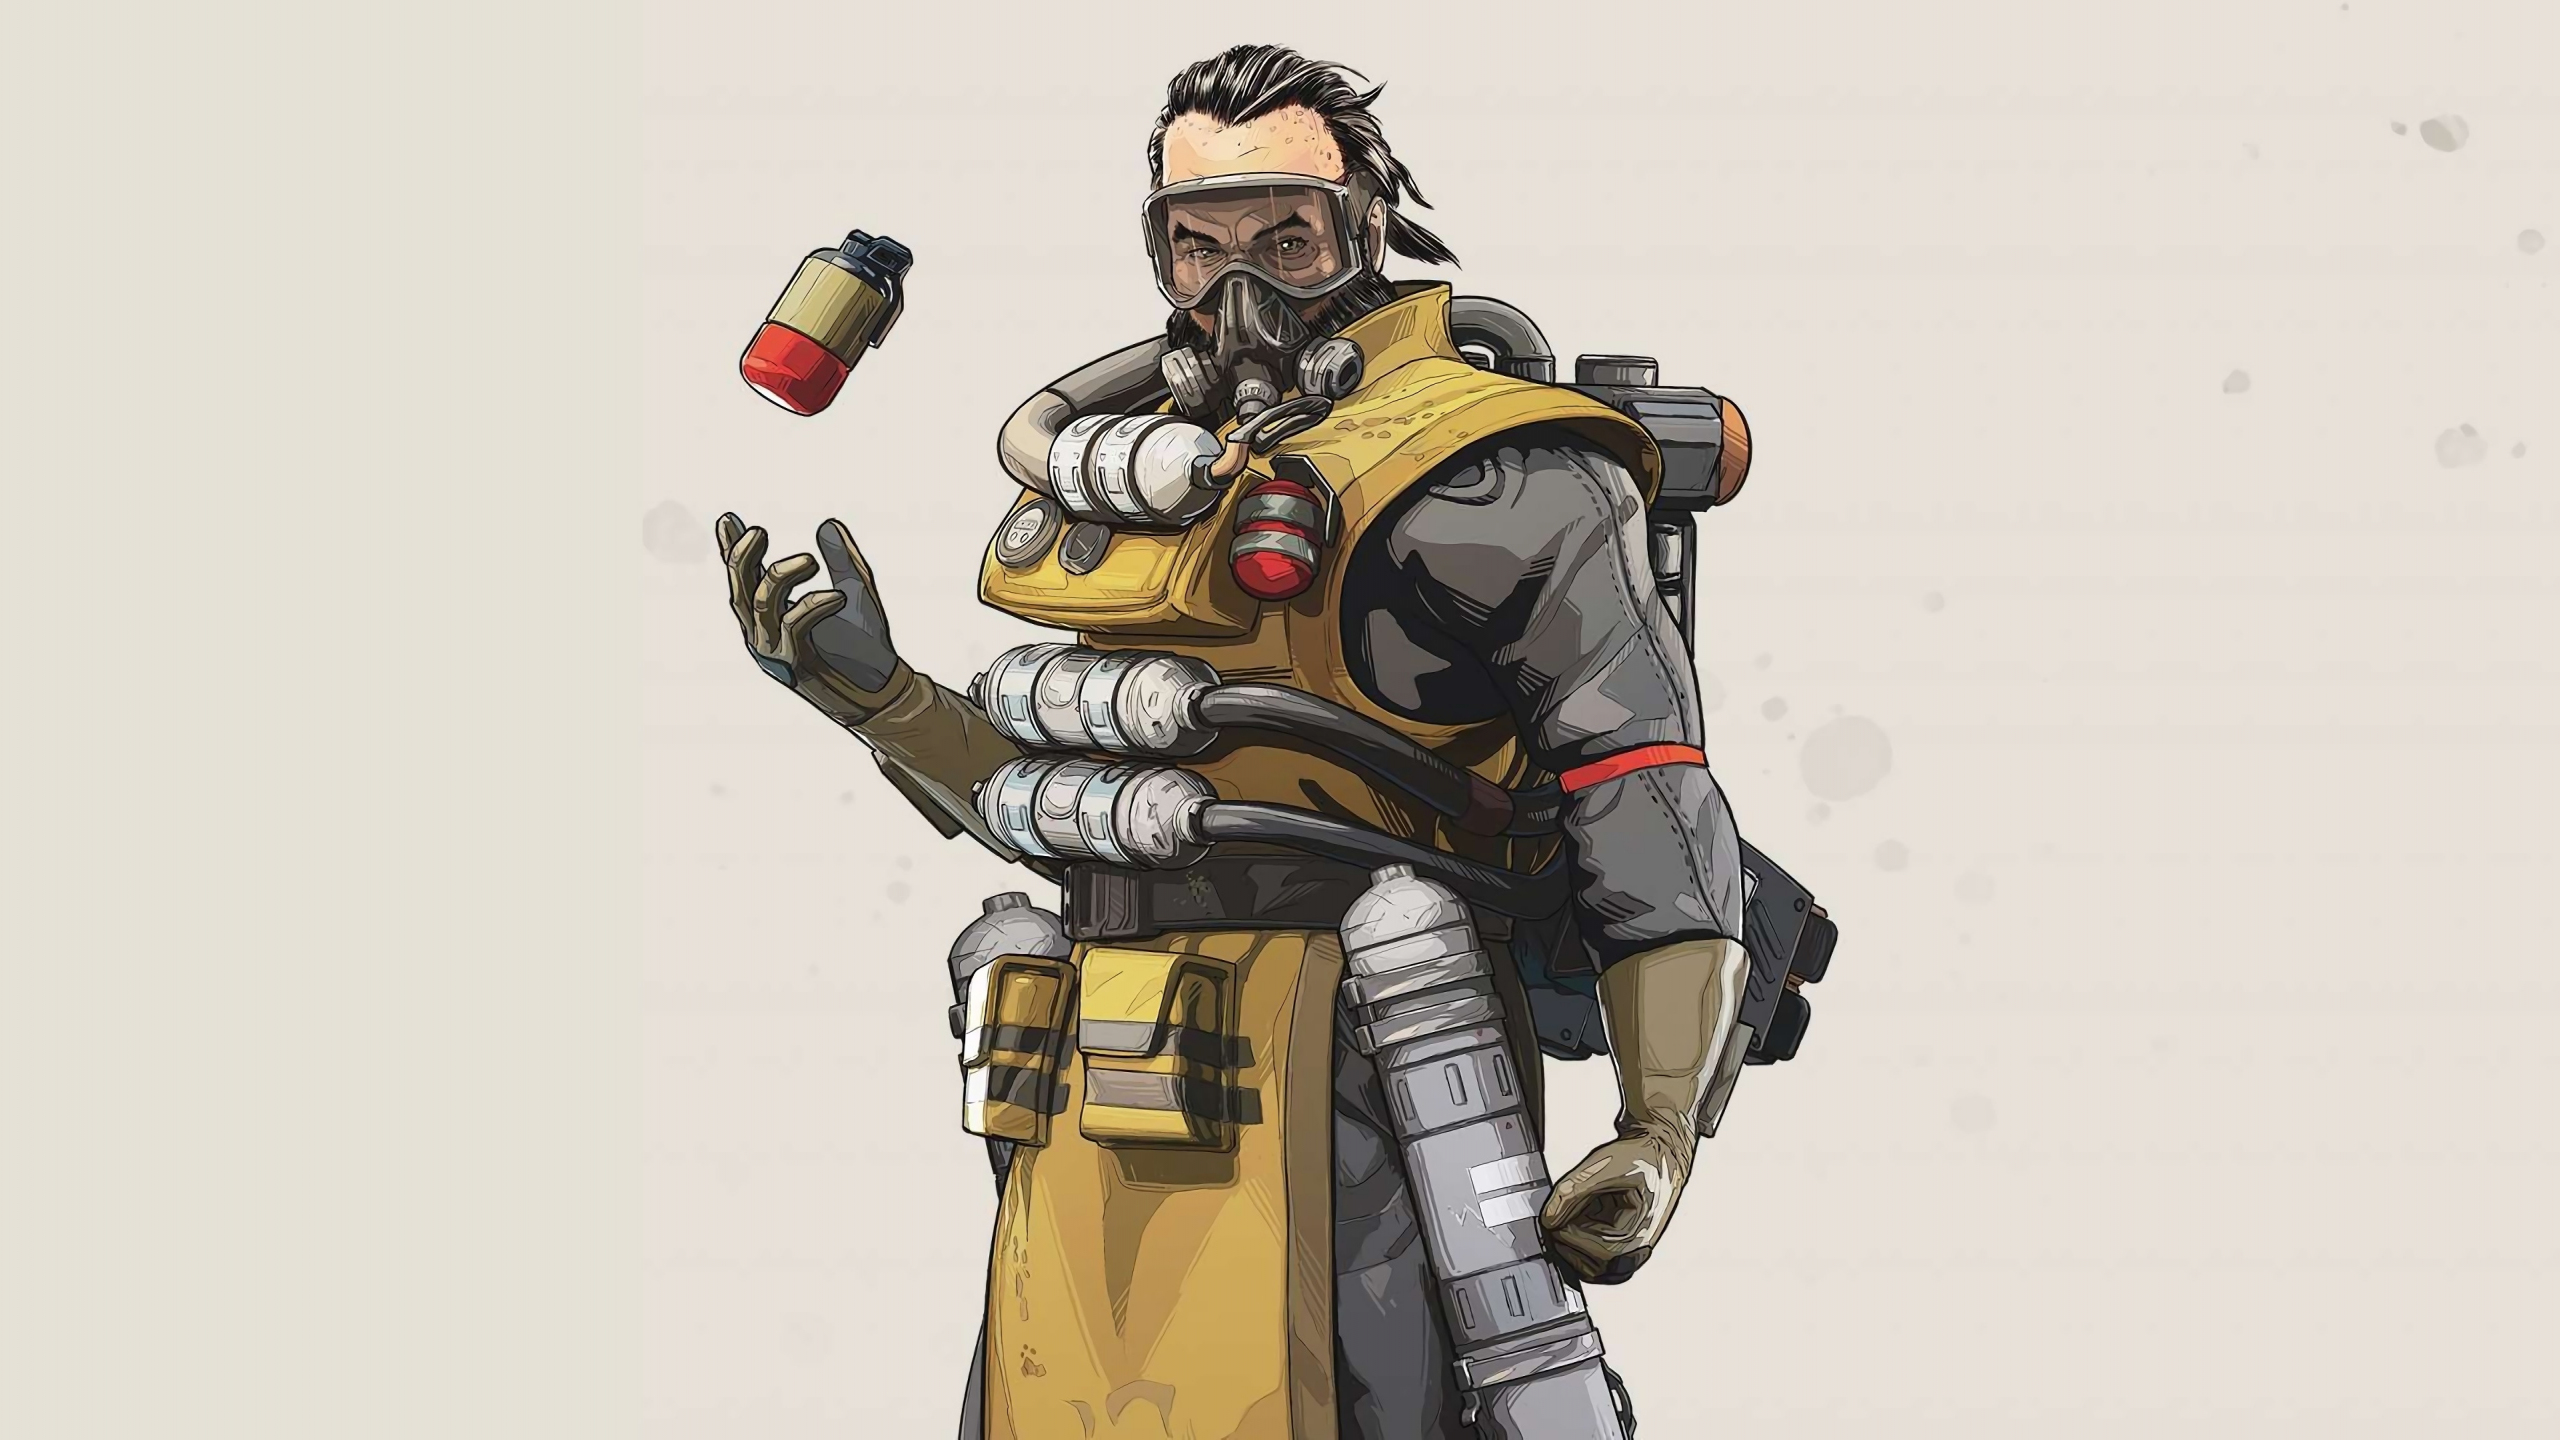 Download 2560x1440 Wallpaper Caustic Apex Legends Soldier Dual Wide Widescreen 16 9 Widescreen 2560x1440 Hd Image Background 186